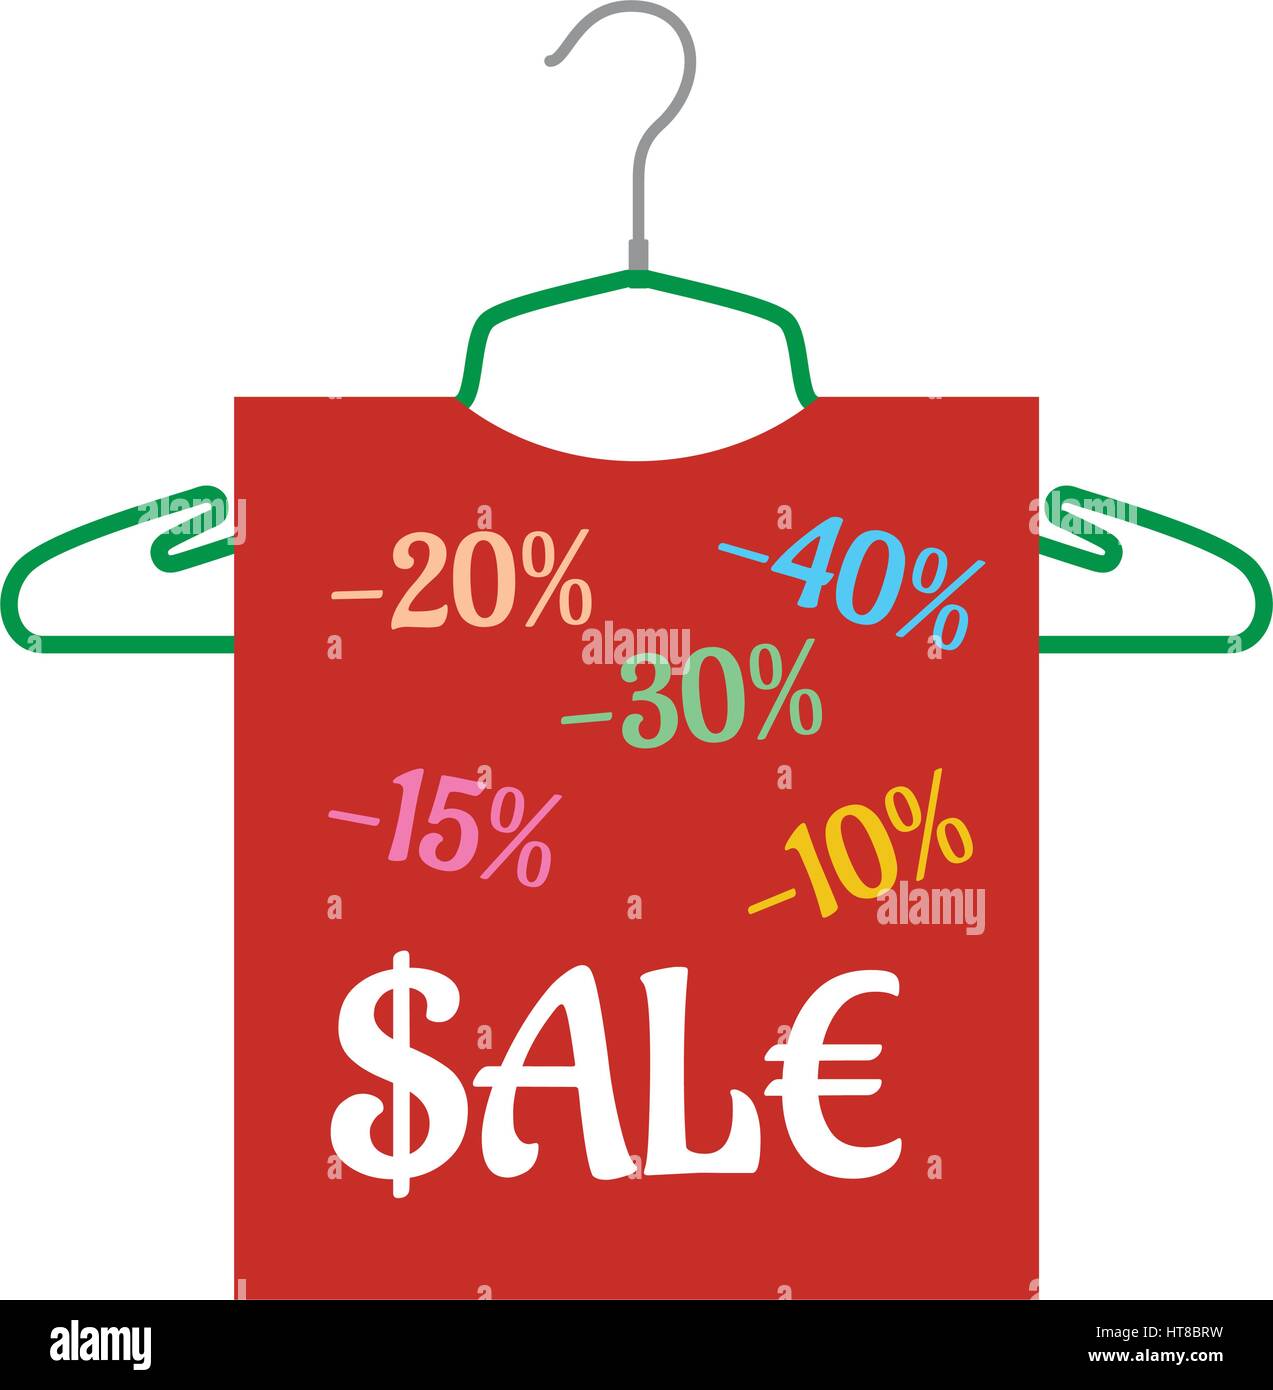 Sale banner hanging on the hanger Stock Vector